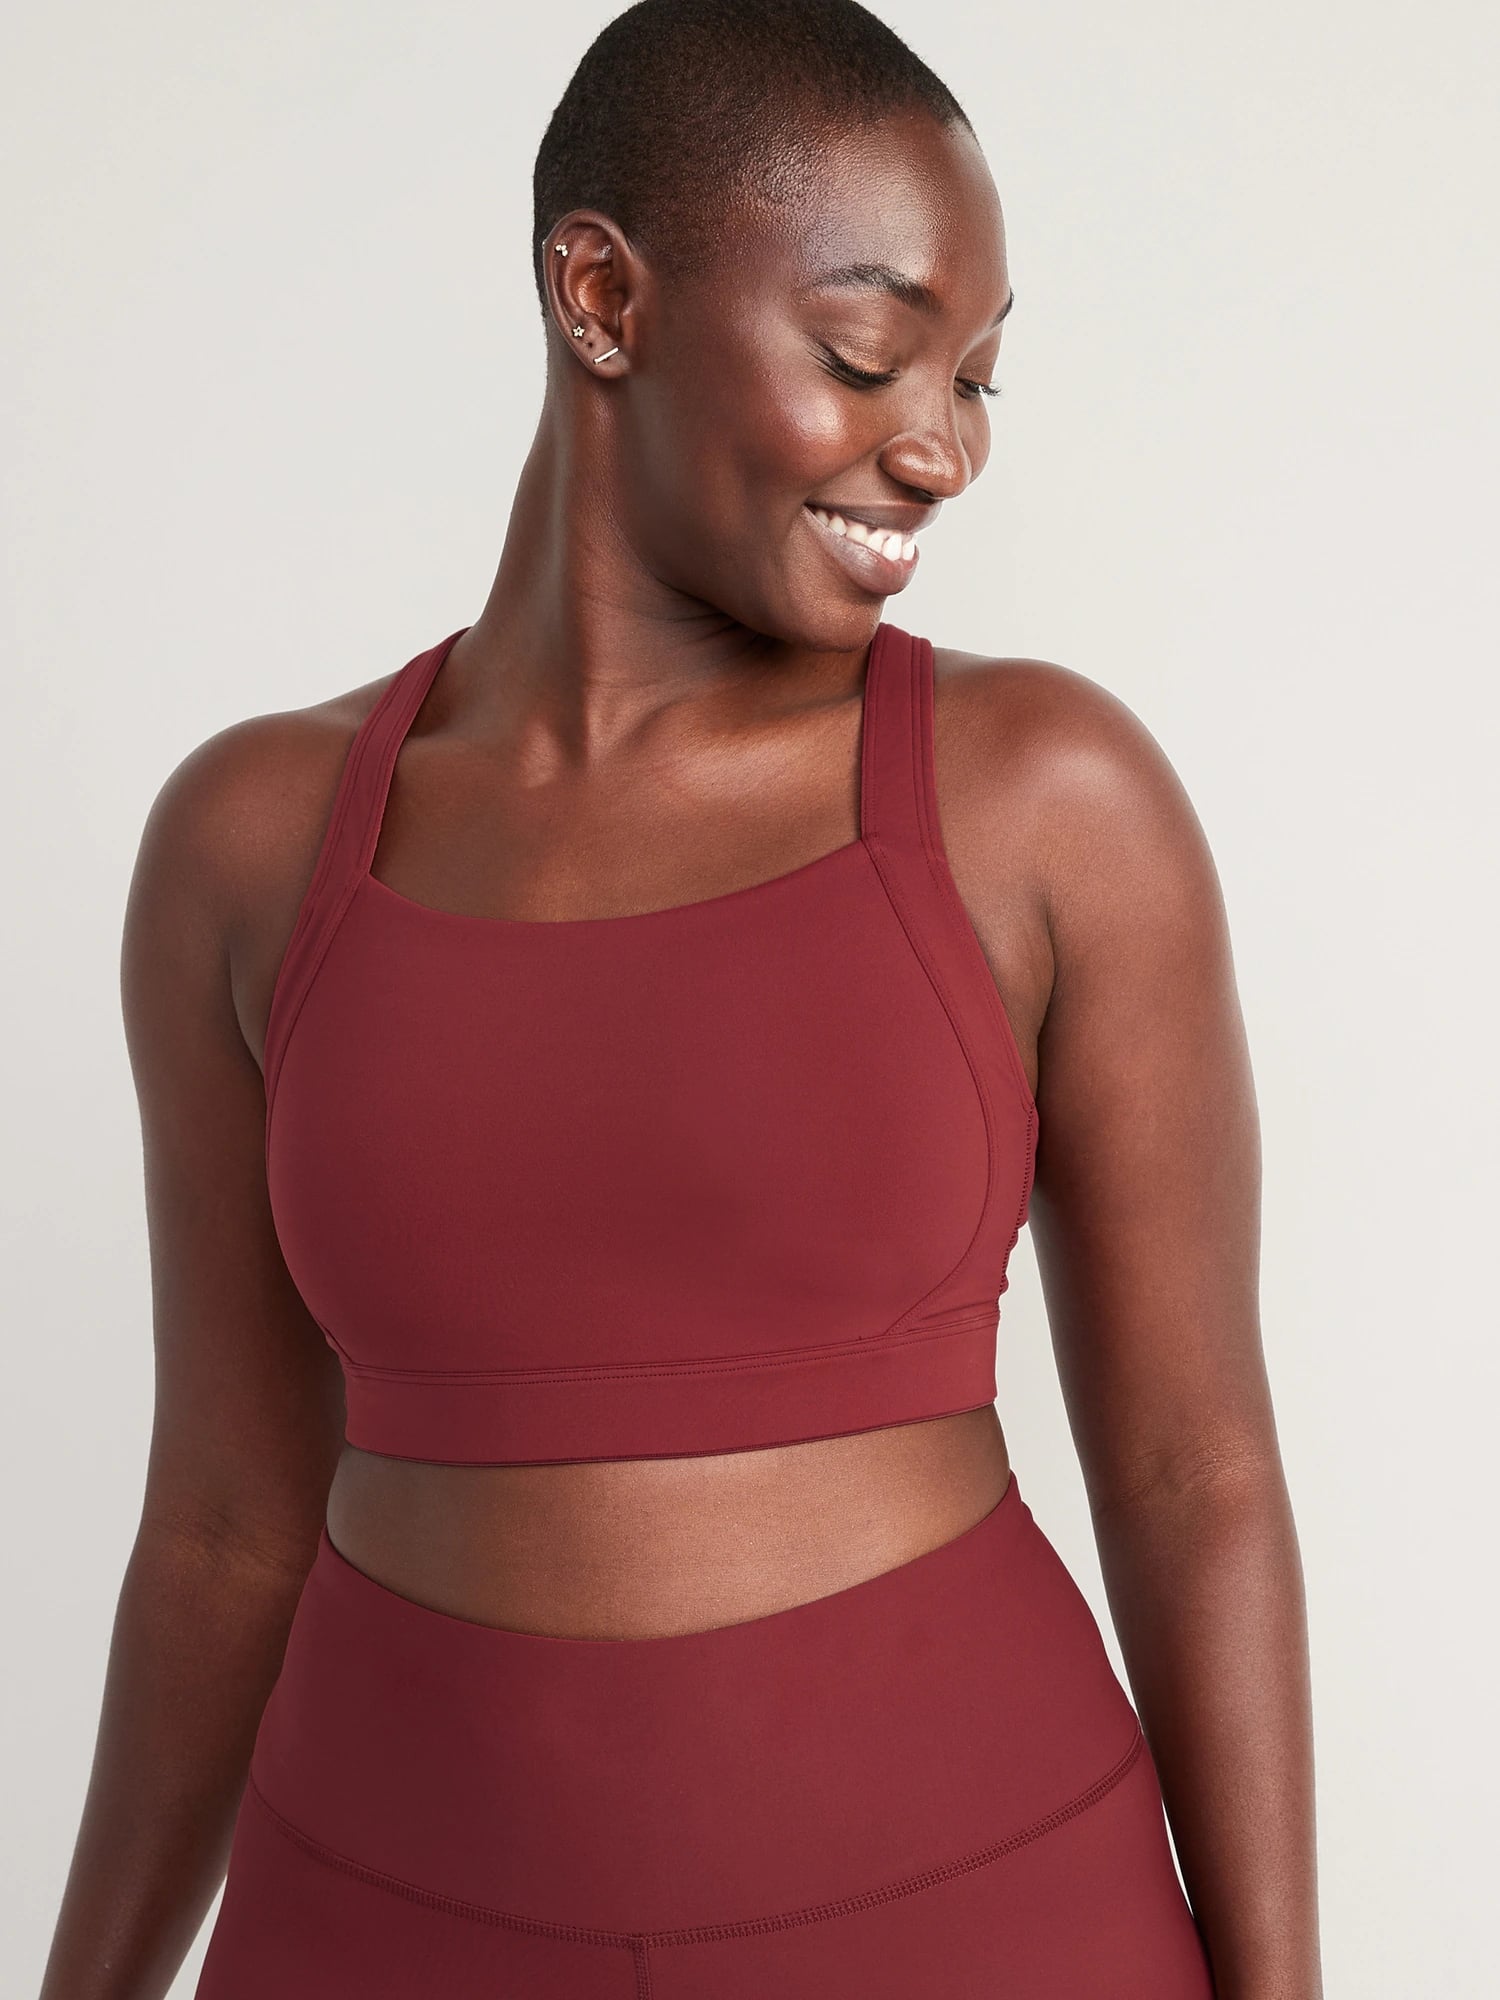 Old Navy Active Sports Bra Small Red - $13 - From Jennifer